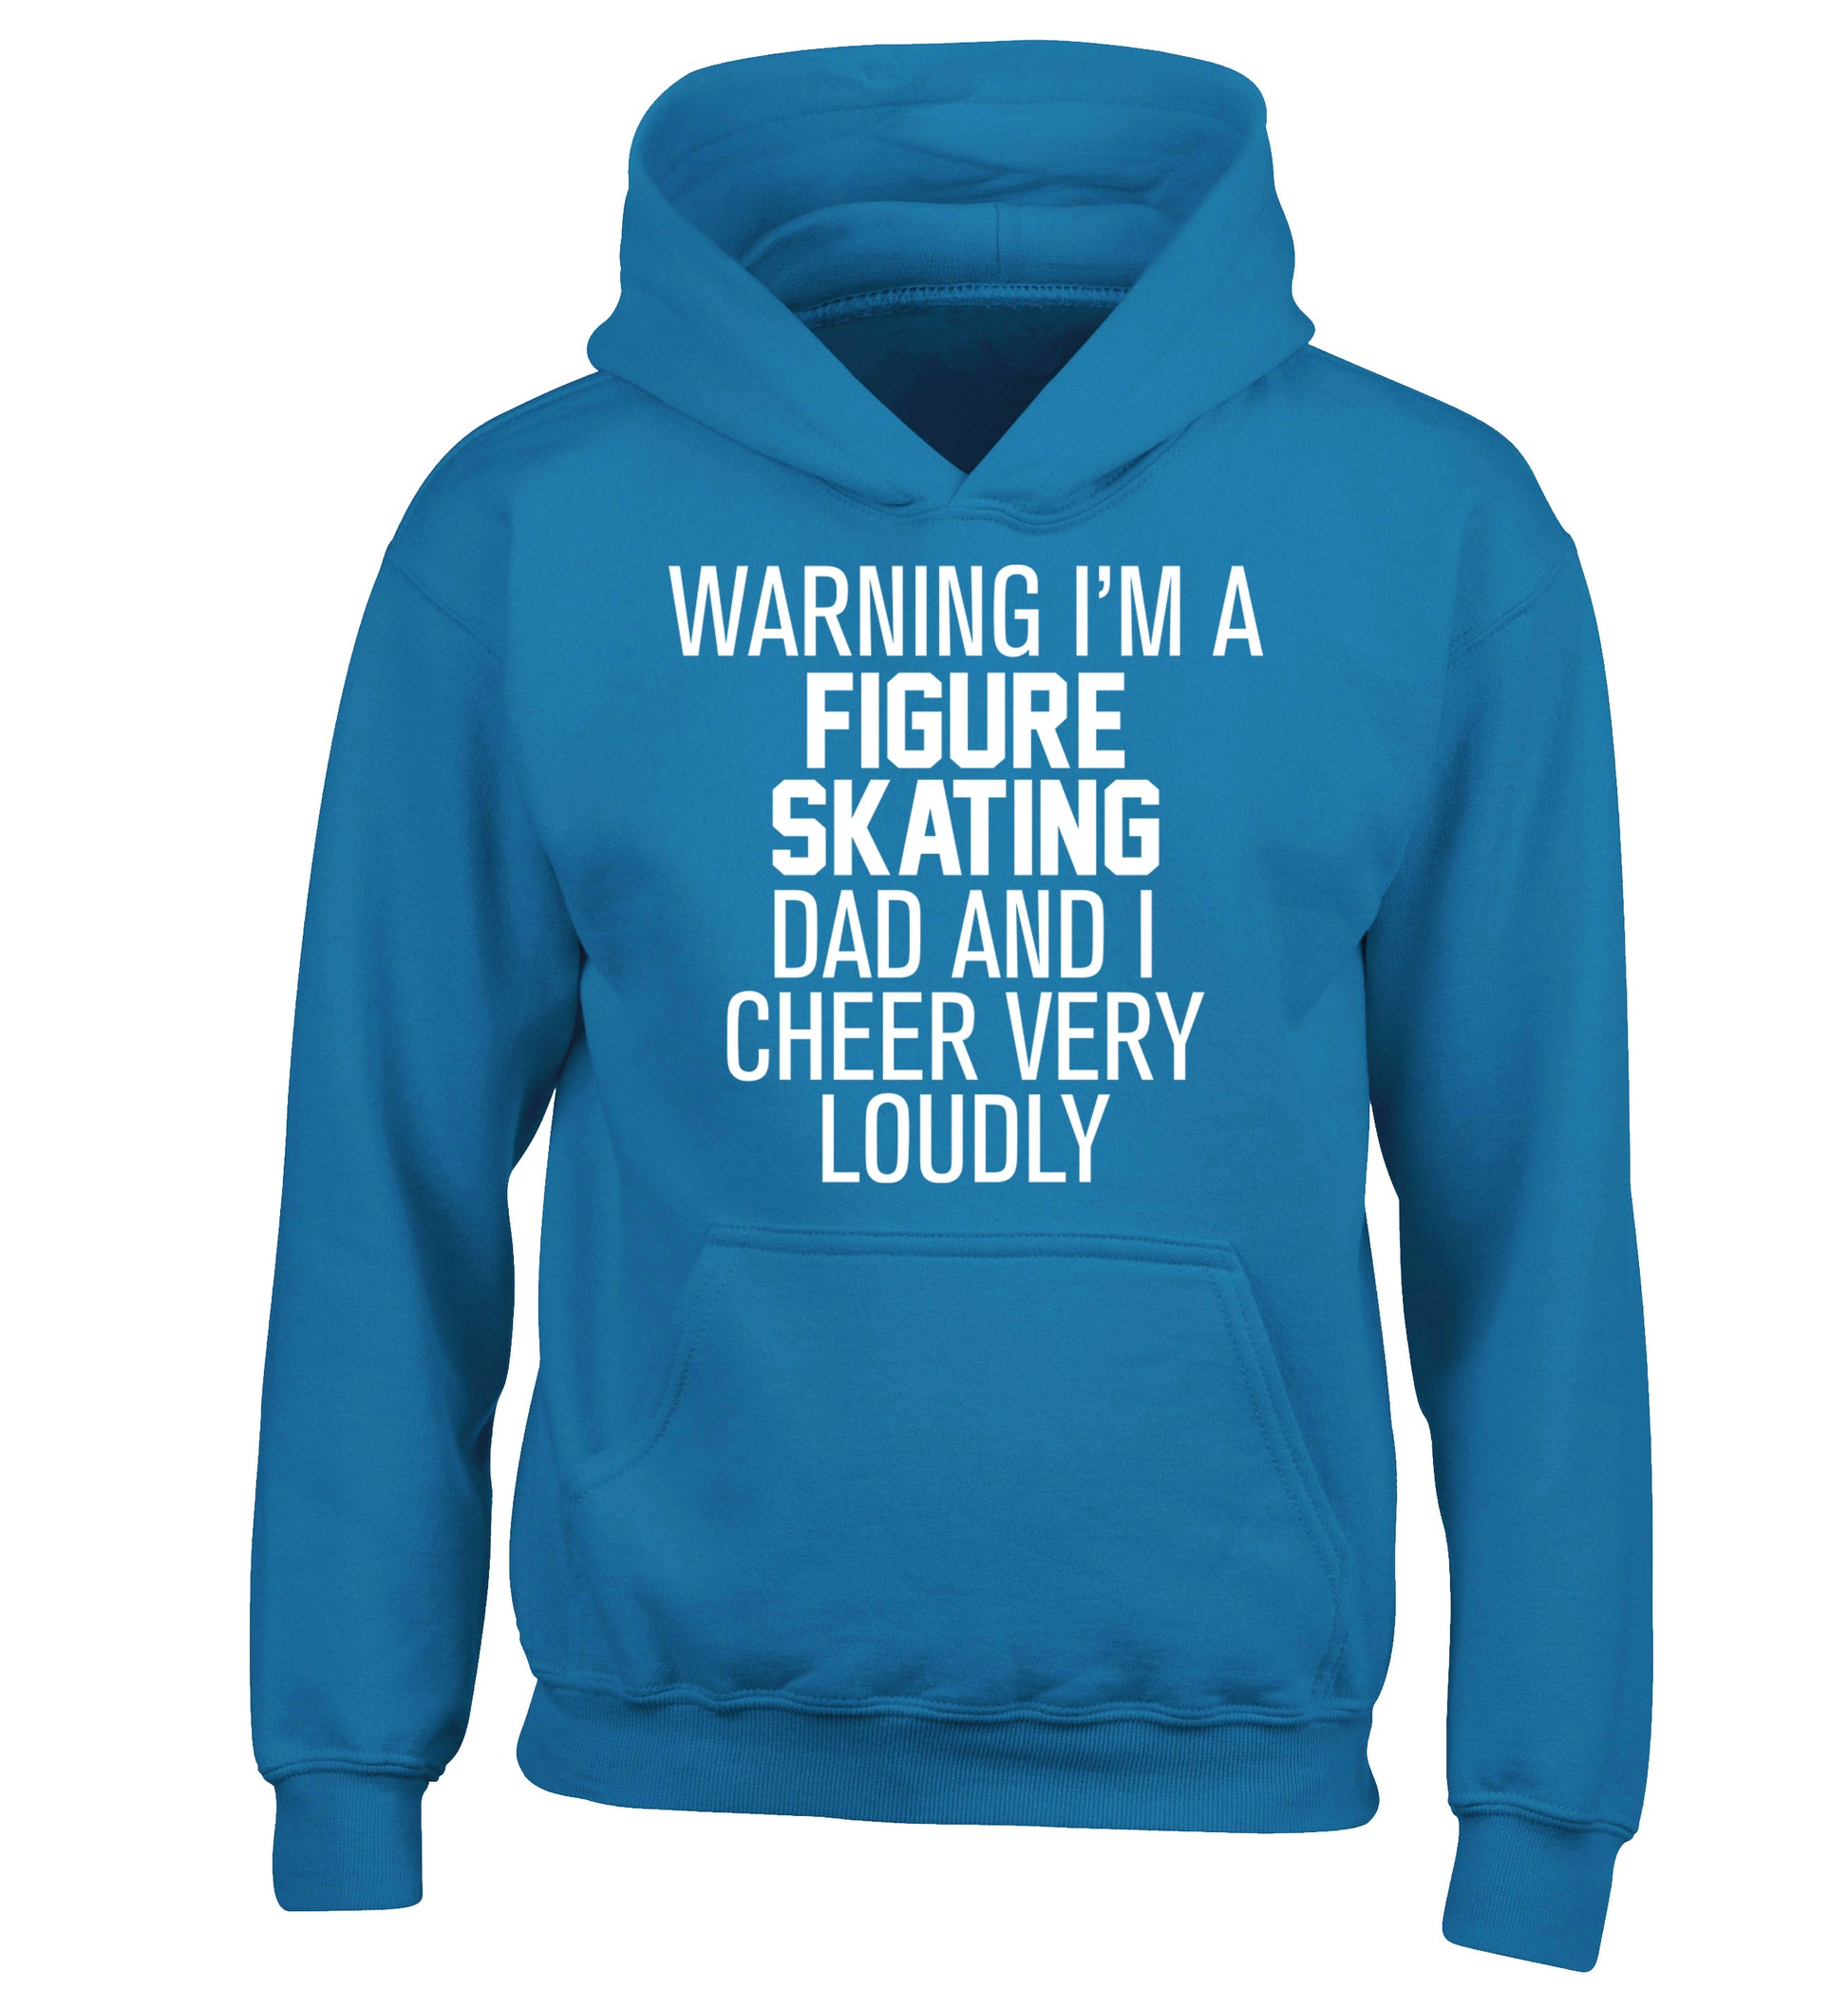 Warning I'm a figure skating dad and I cheer very loudly children's blue hoodie 12-14 Years